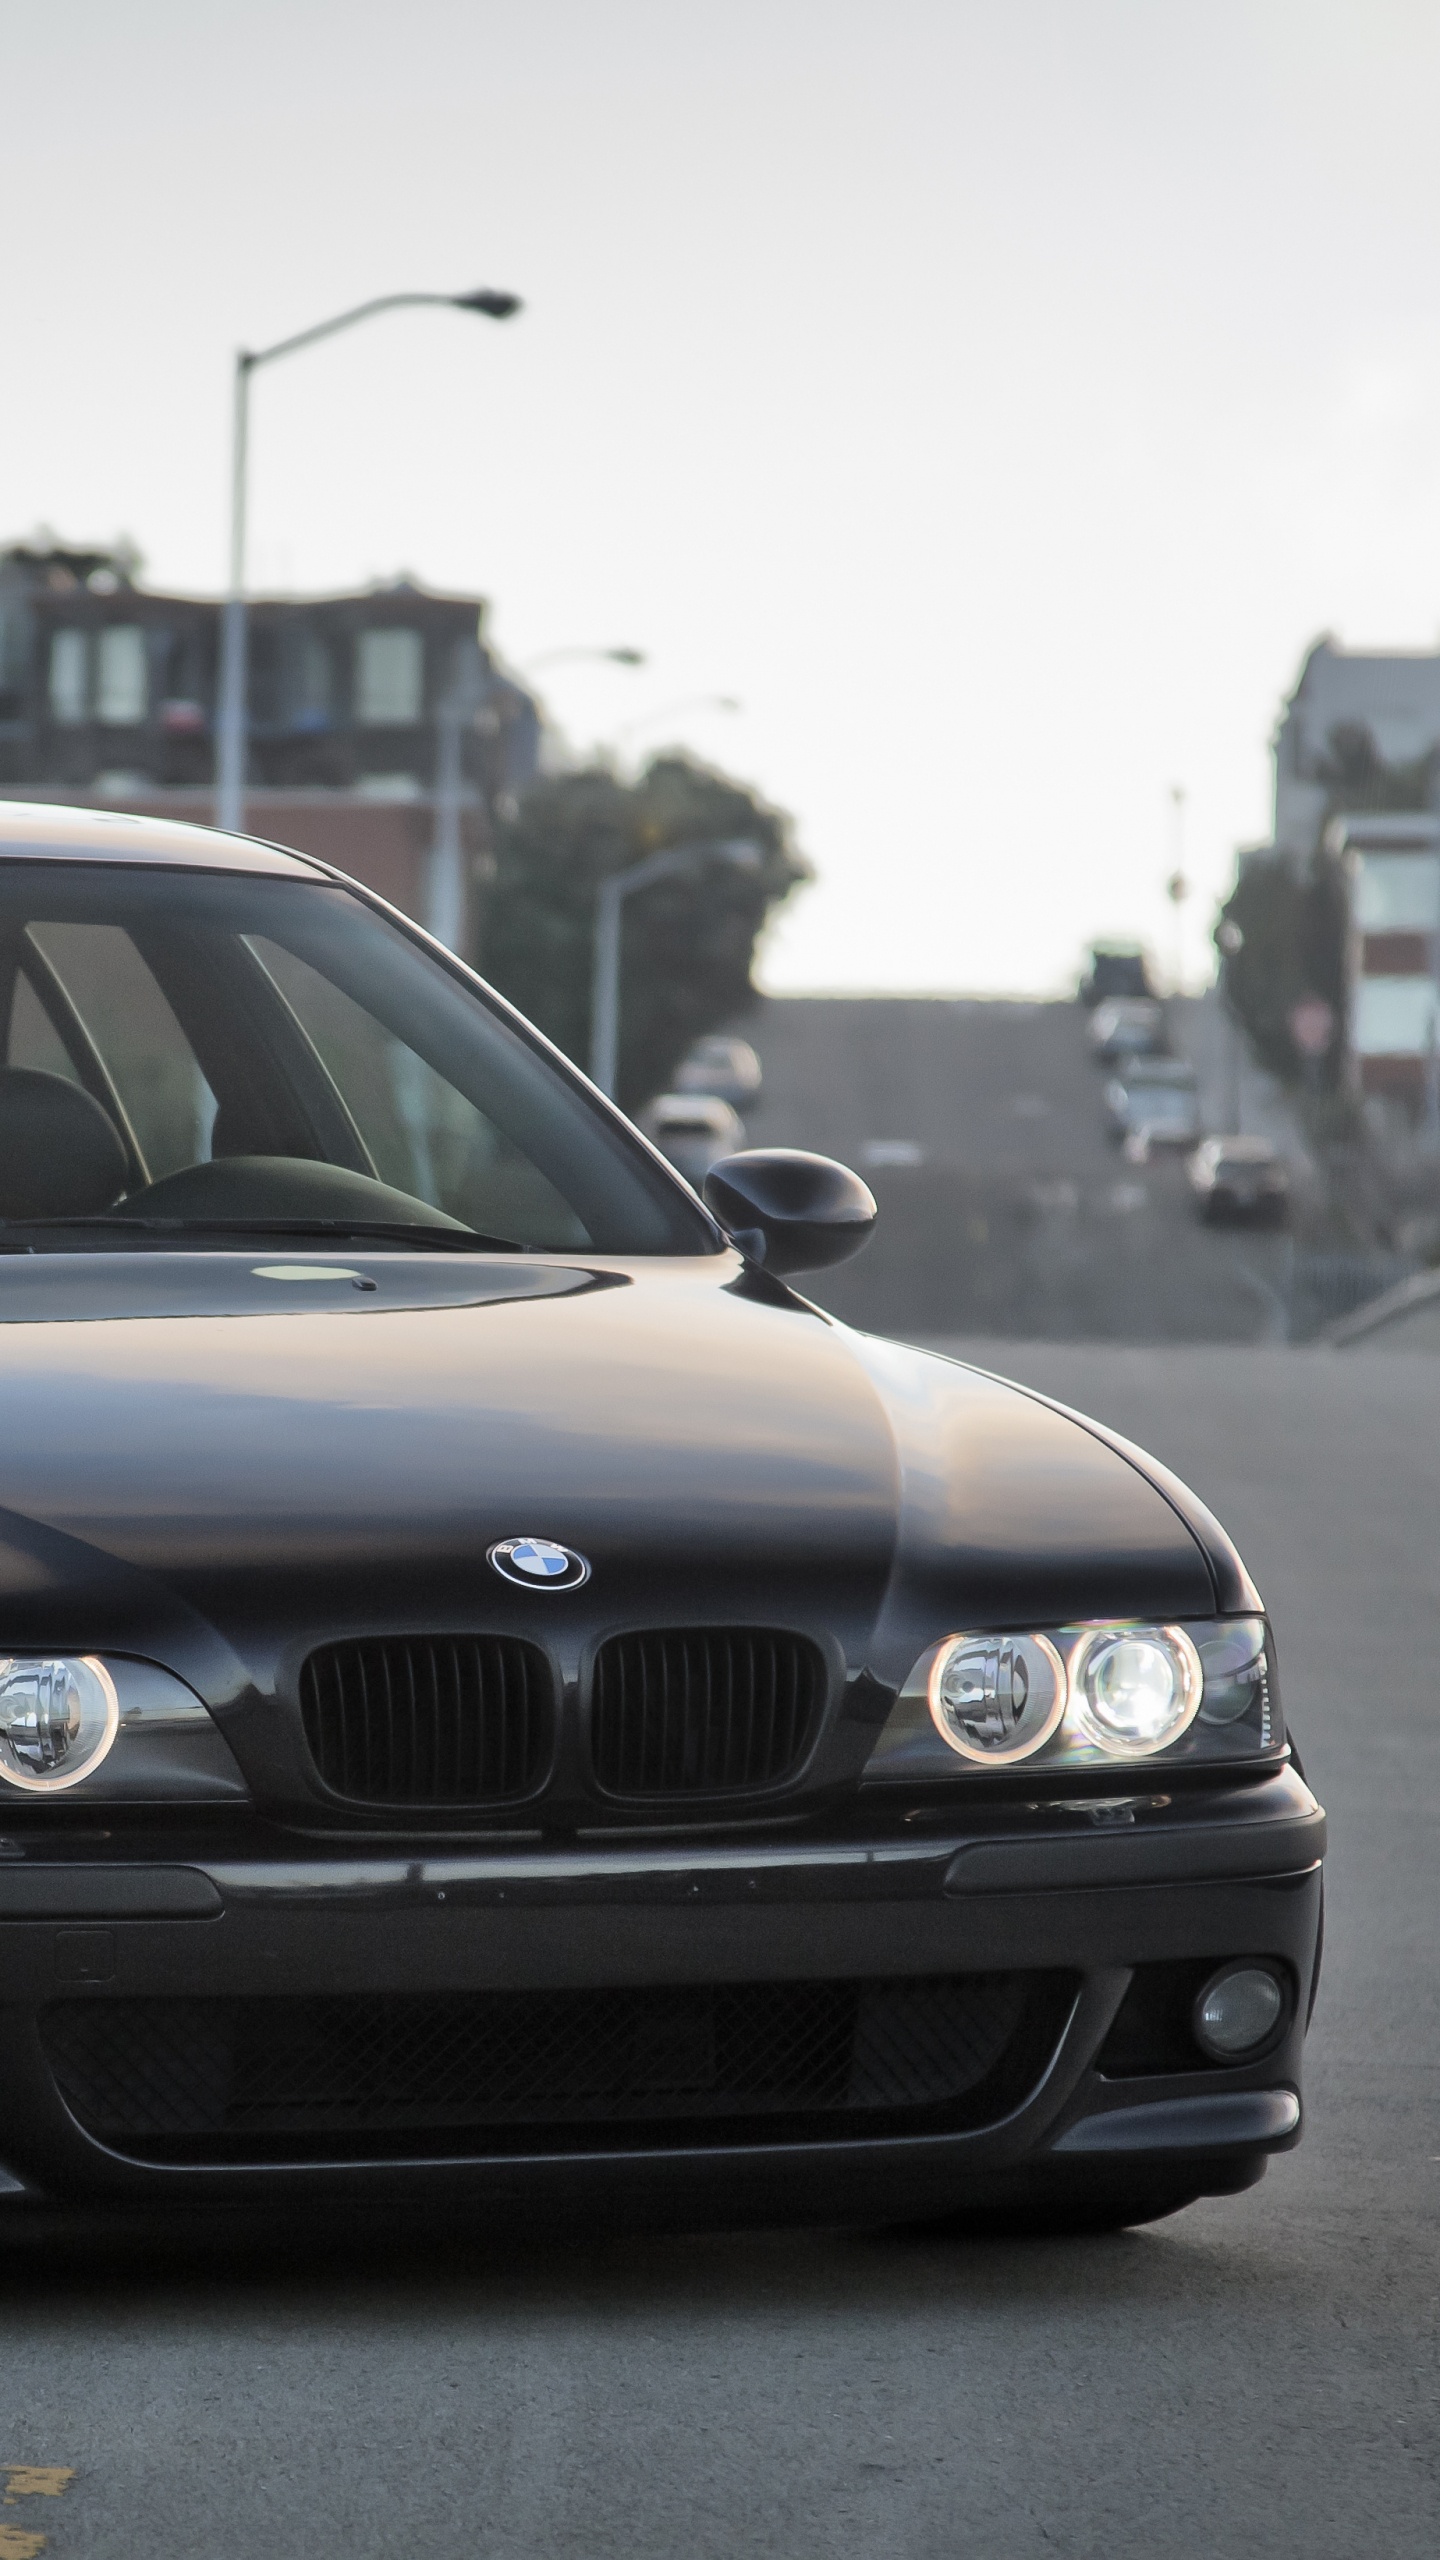 Black Bmw m 3 on Road During Daytime. Wallpaper in 1440x2560 Resolution